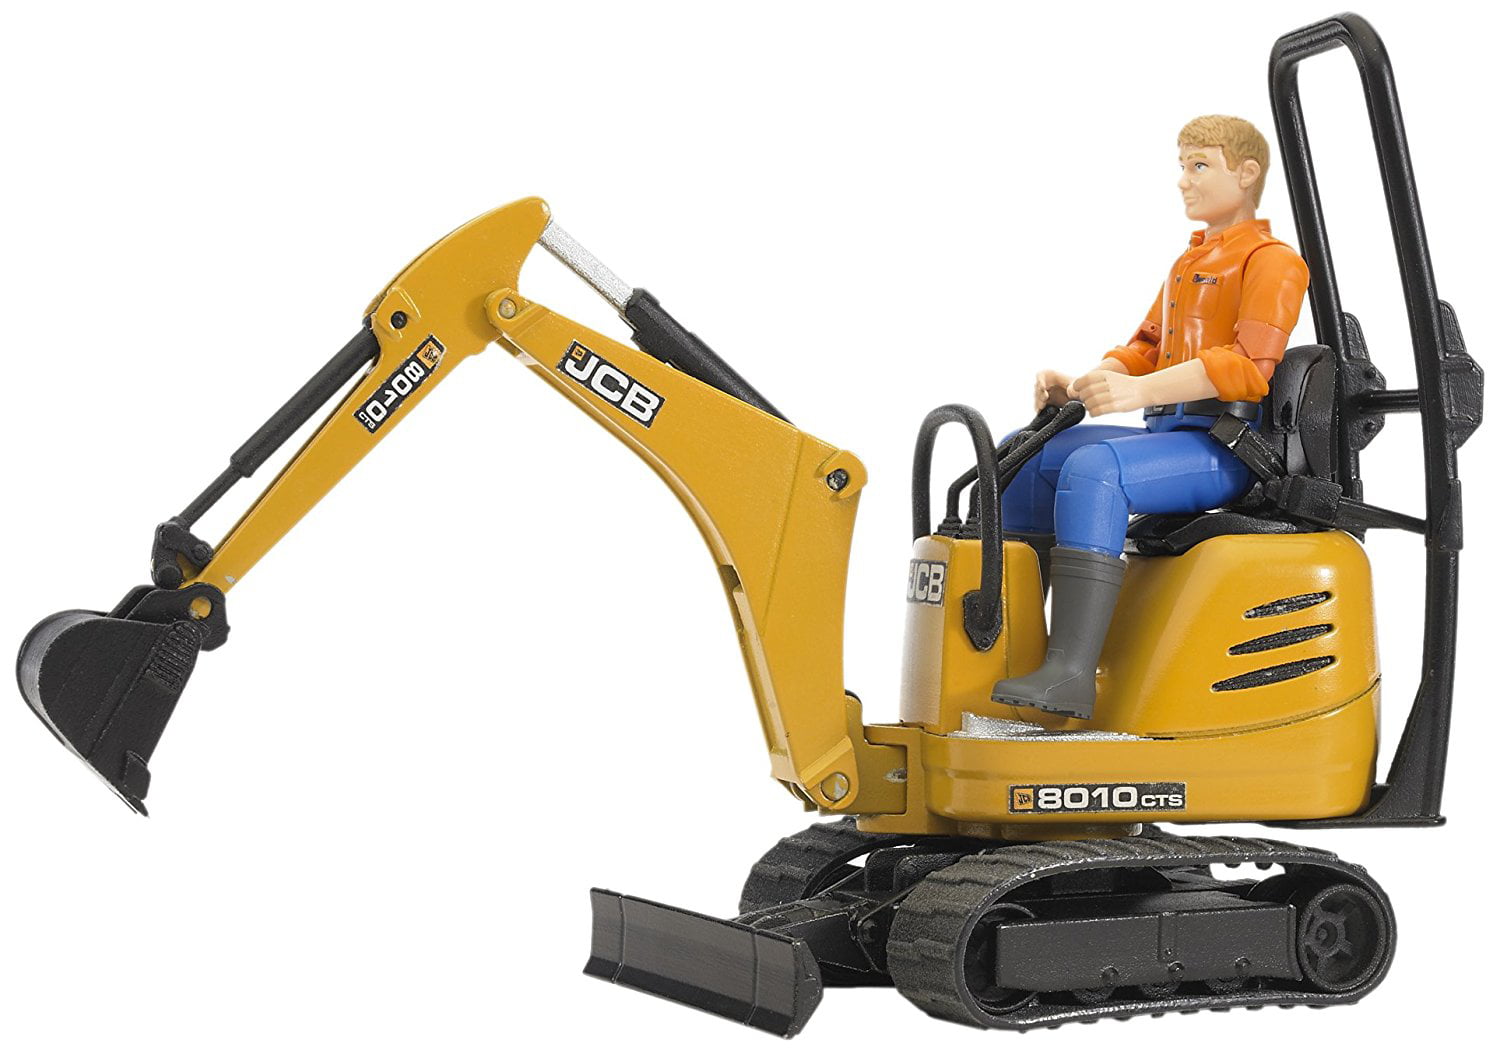 New Bruder Bworld Construction Set with Man Colors May Vary Free Shipping 